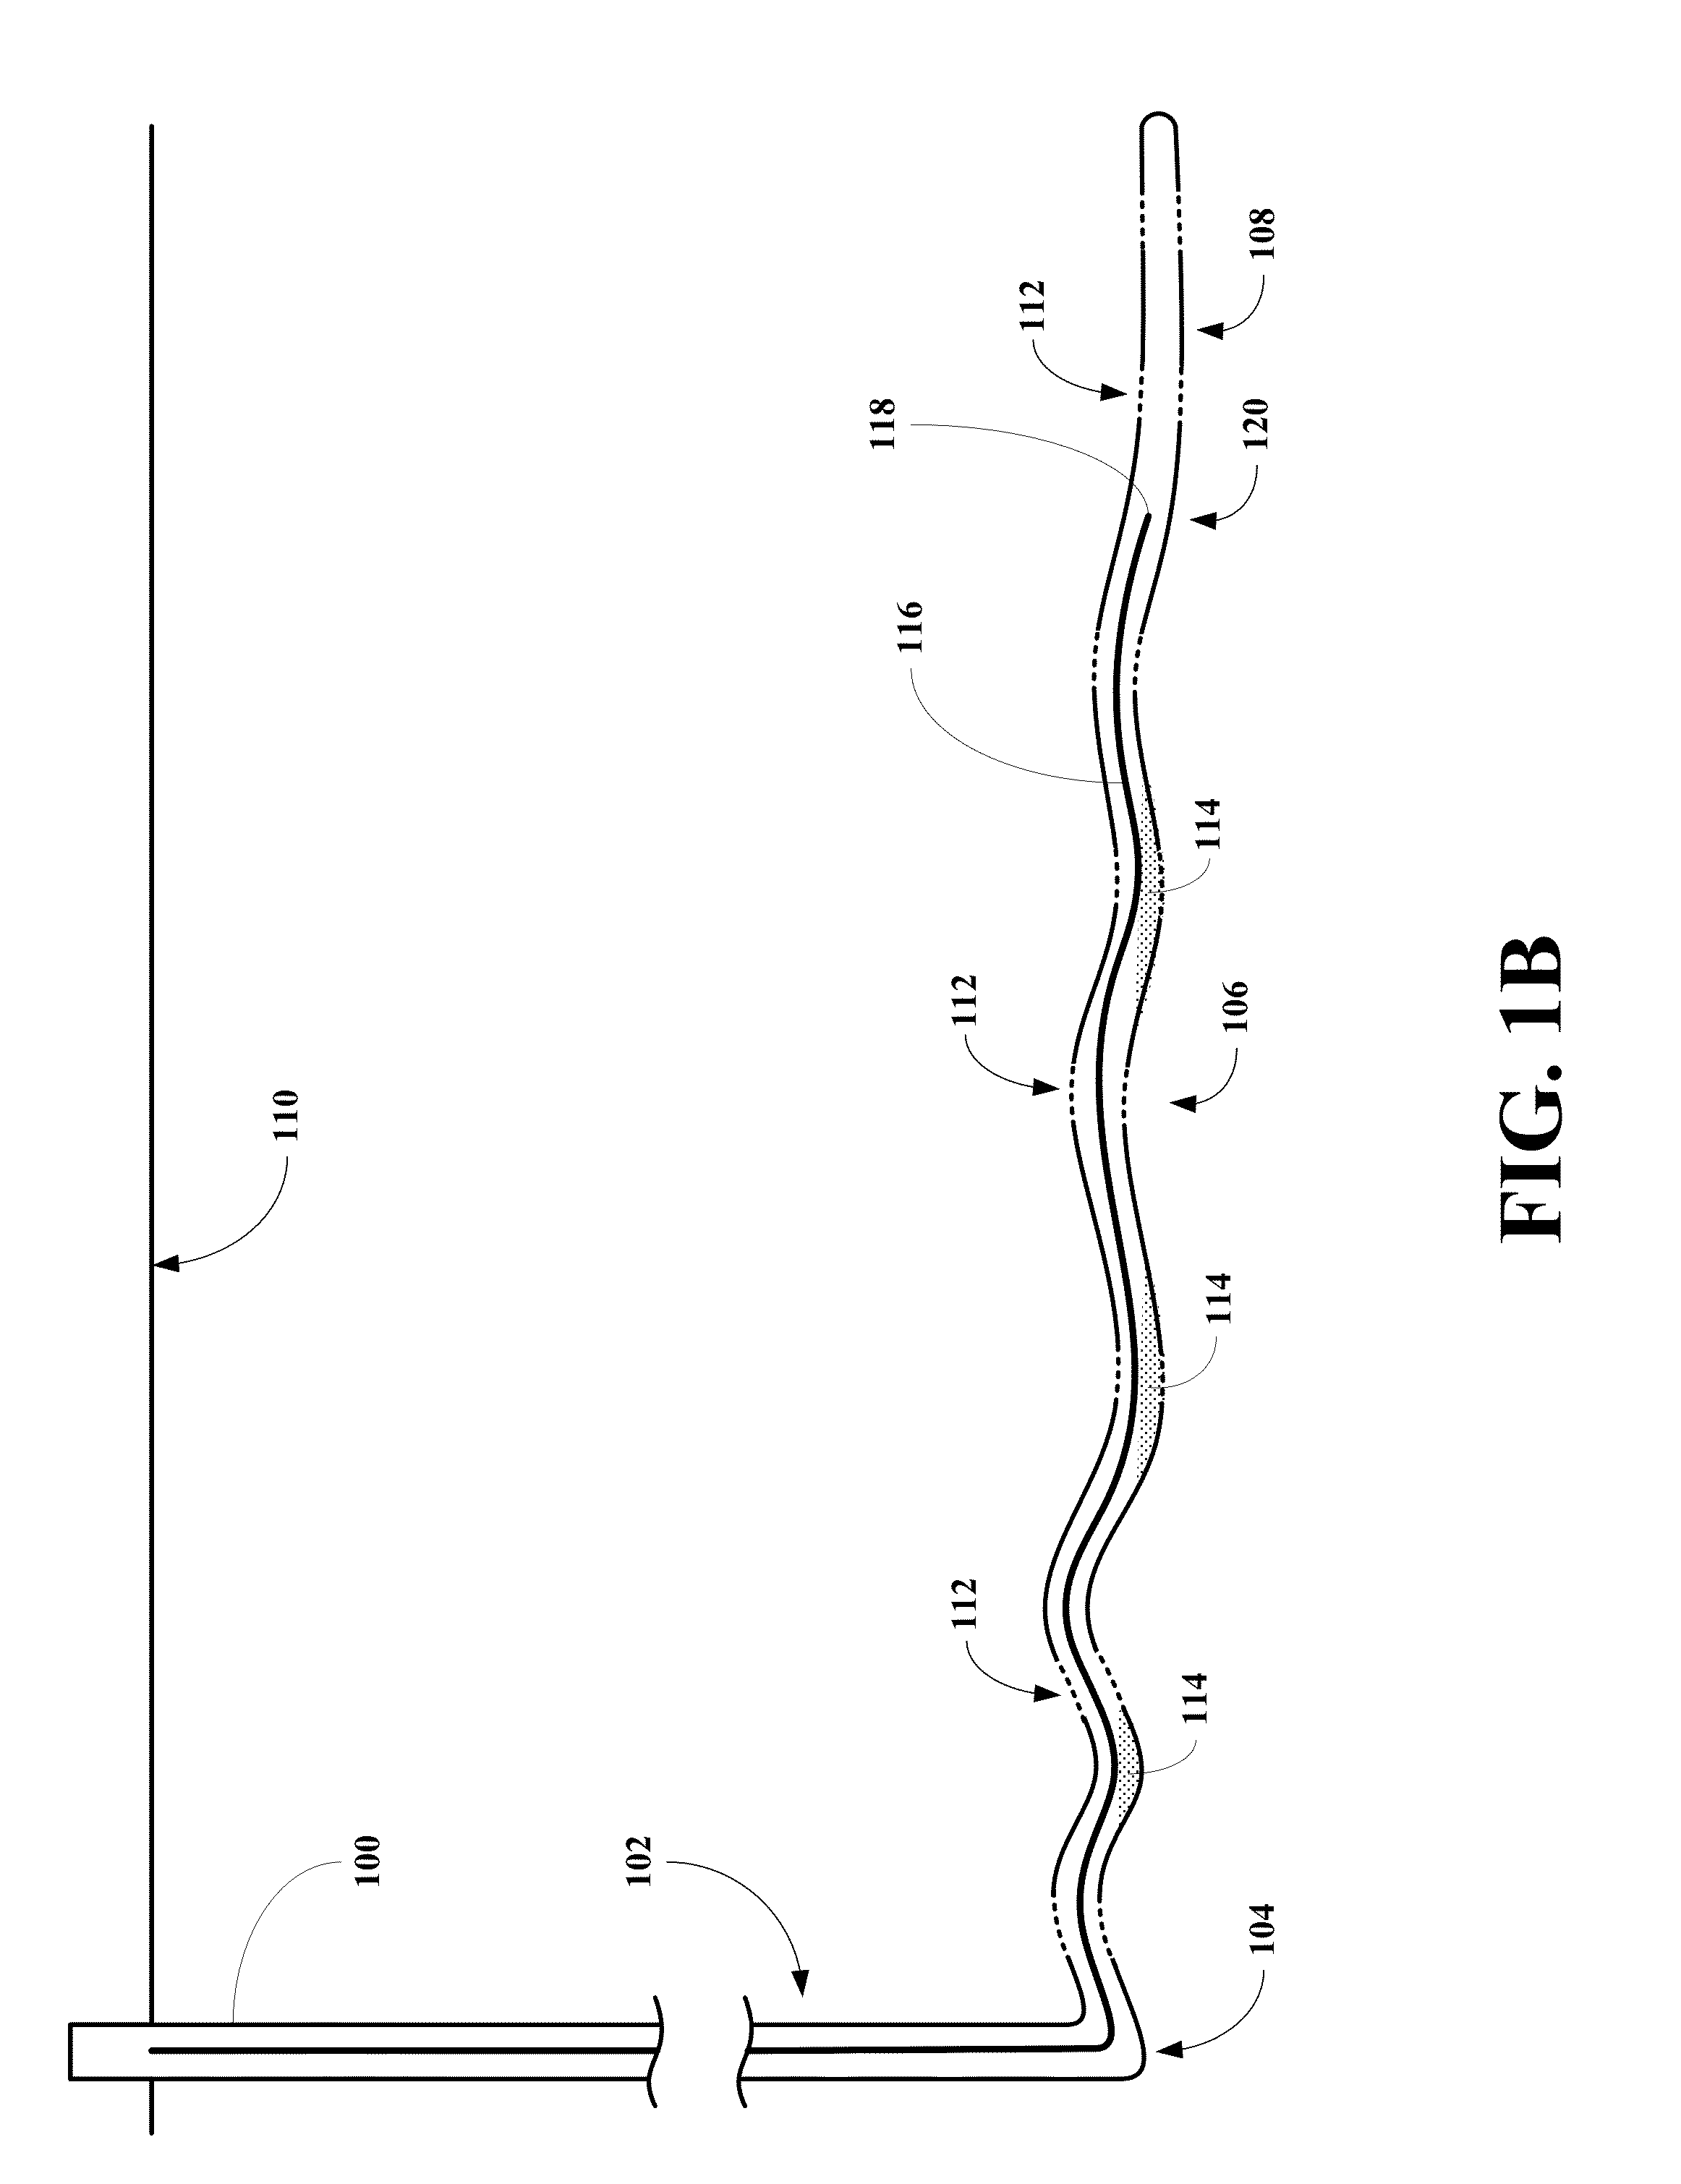 Apparatuses, systems, and methods for forming in-situ gel pills to lift liquids from horizontal wells